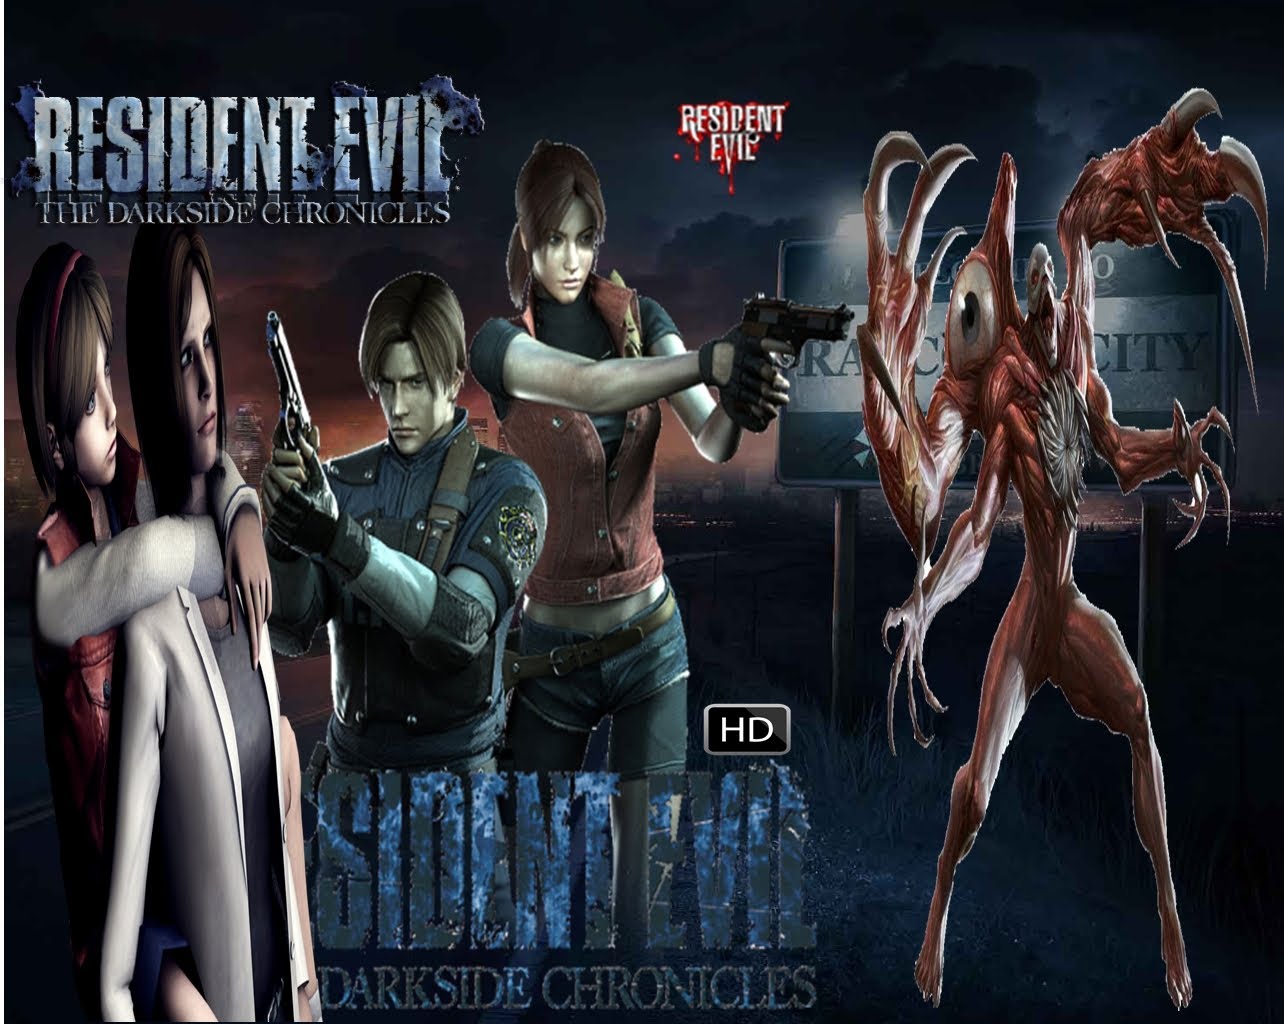 Resident evil collection. Резидент ивел Darkside Chronicles. Resident Evil: the Darkside Chronicles.